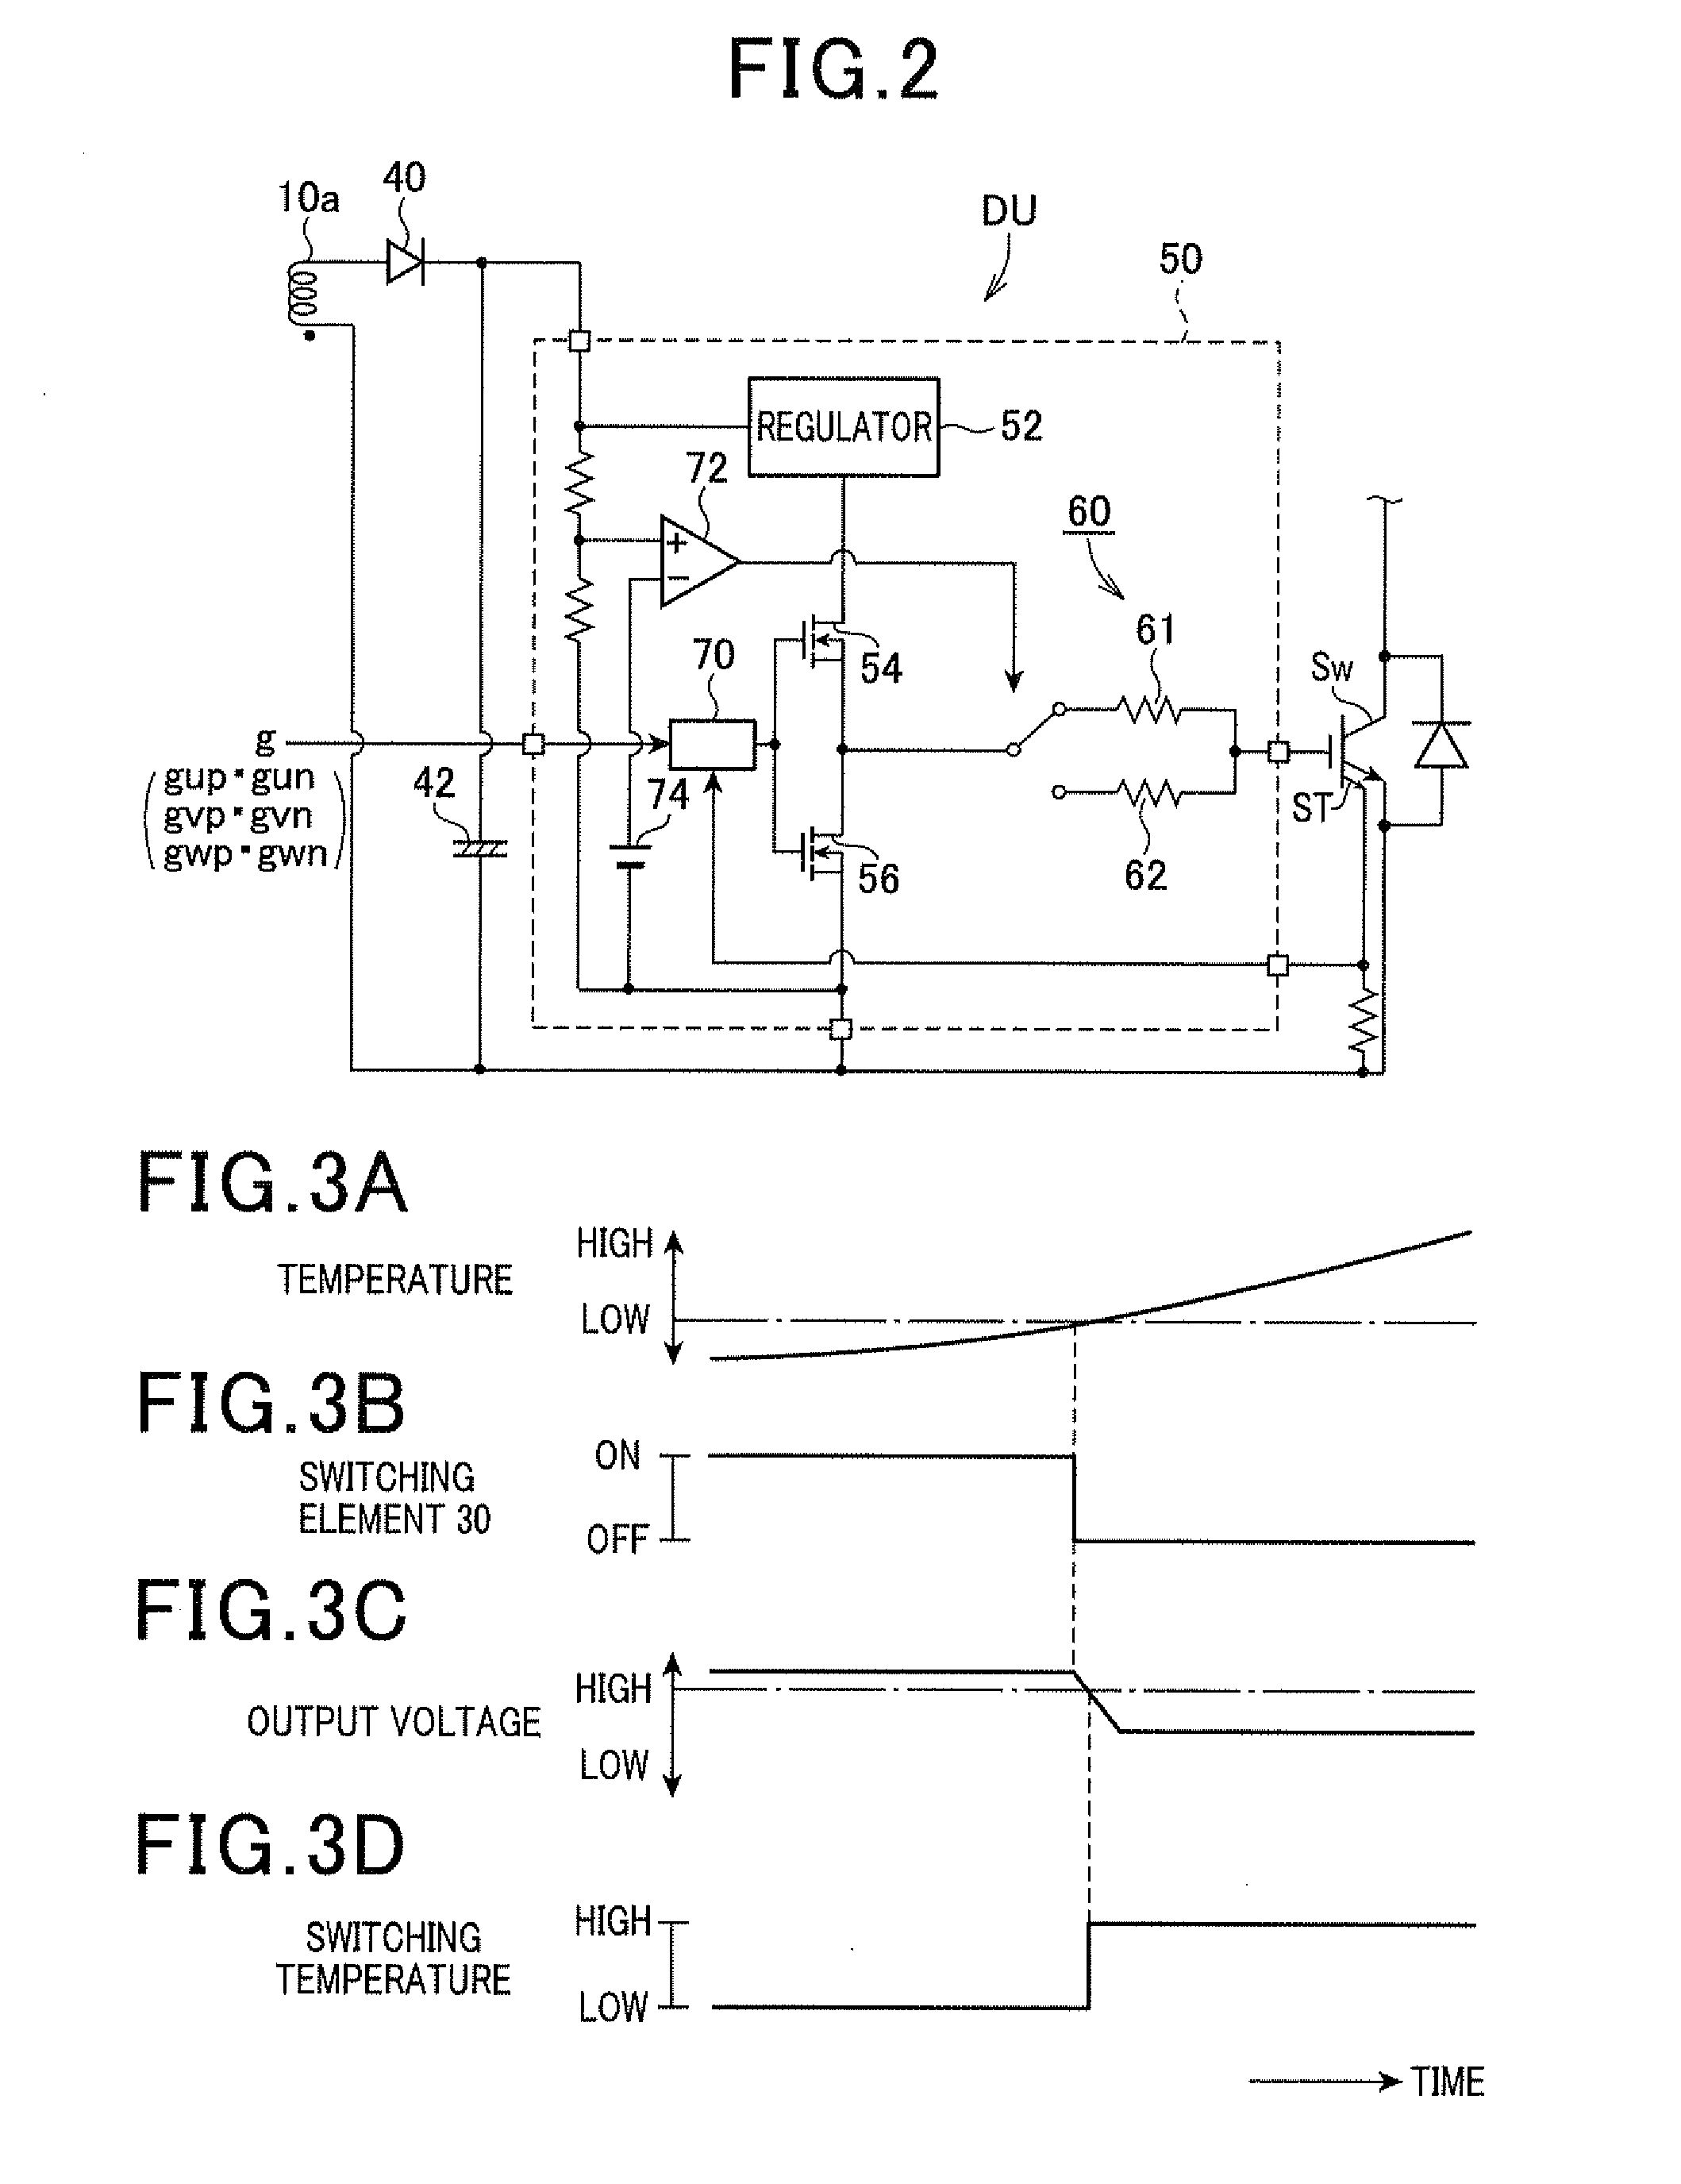 Drive system for power switching elements